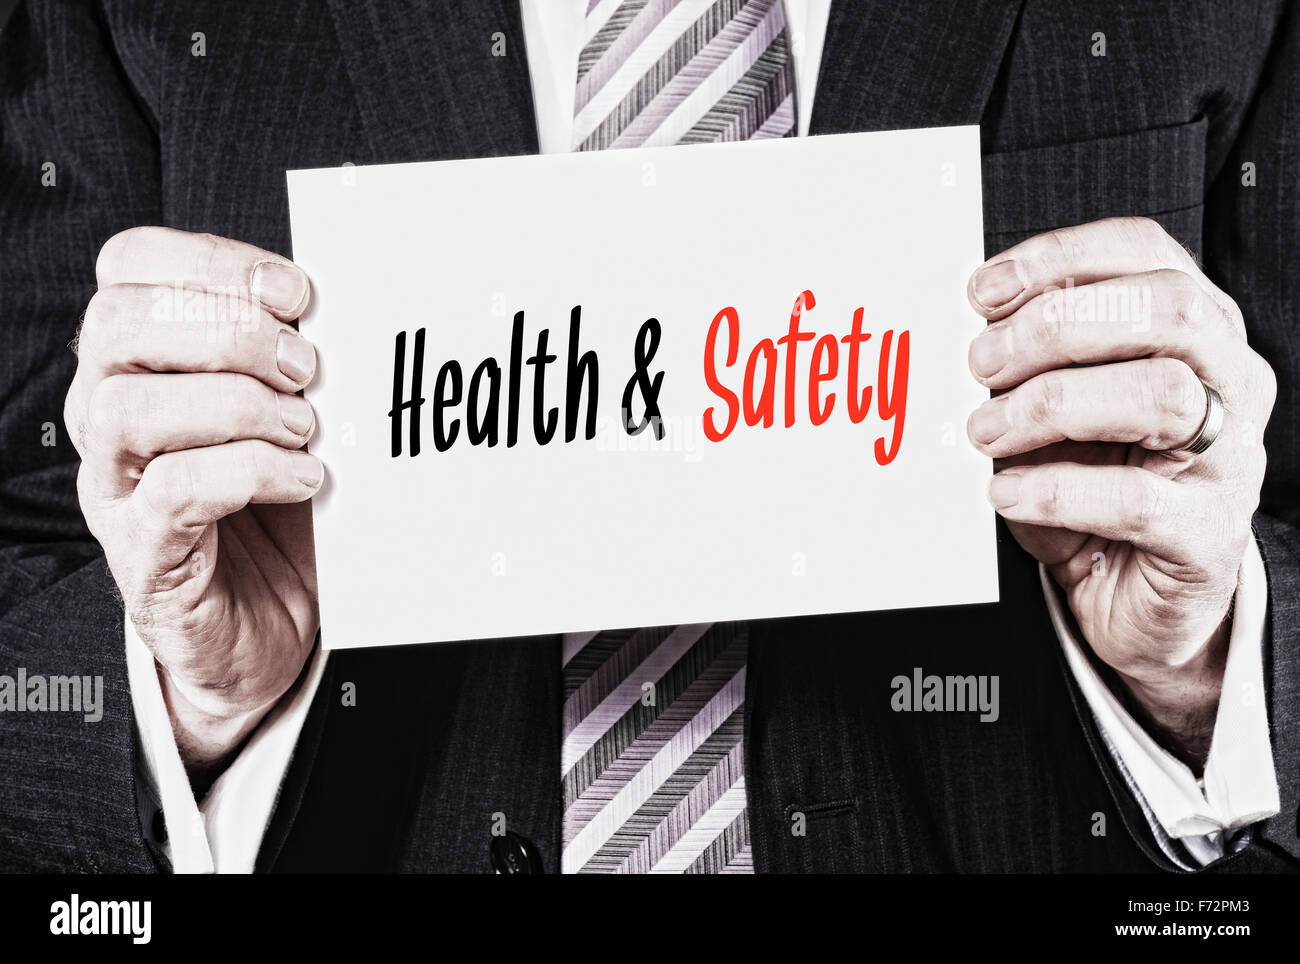 Health & Safety, Induction Training headlines concept. Stock Photo